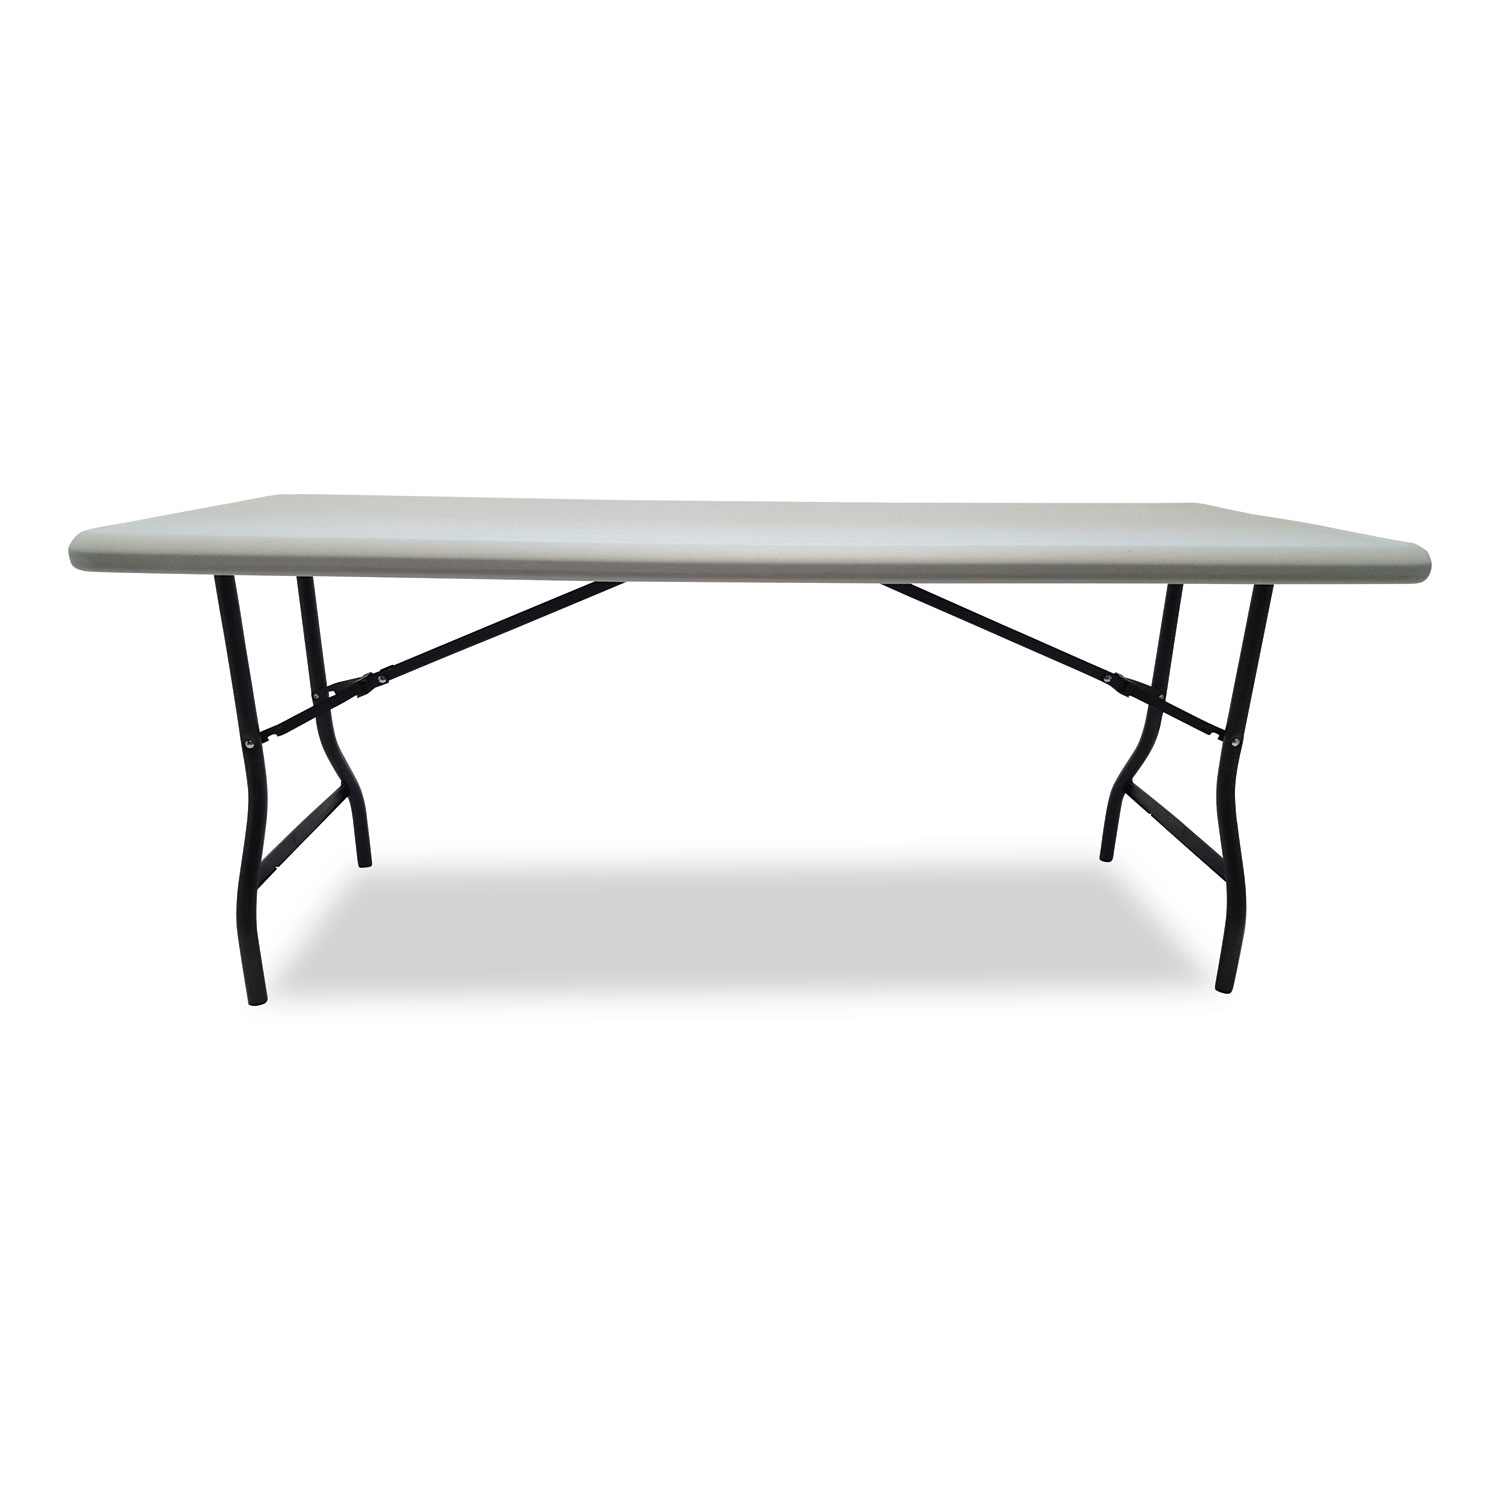  Iceberg 65223 IndestrucTables Too 1200 Series Folding Table, 72w x 30d x 29h, Platinum (ICE65223) 